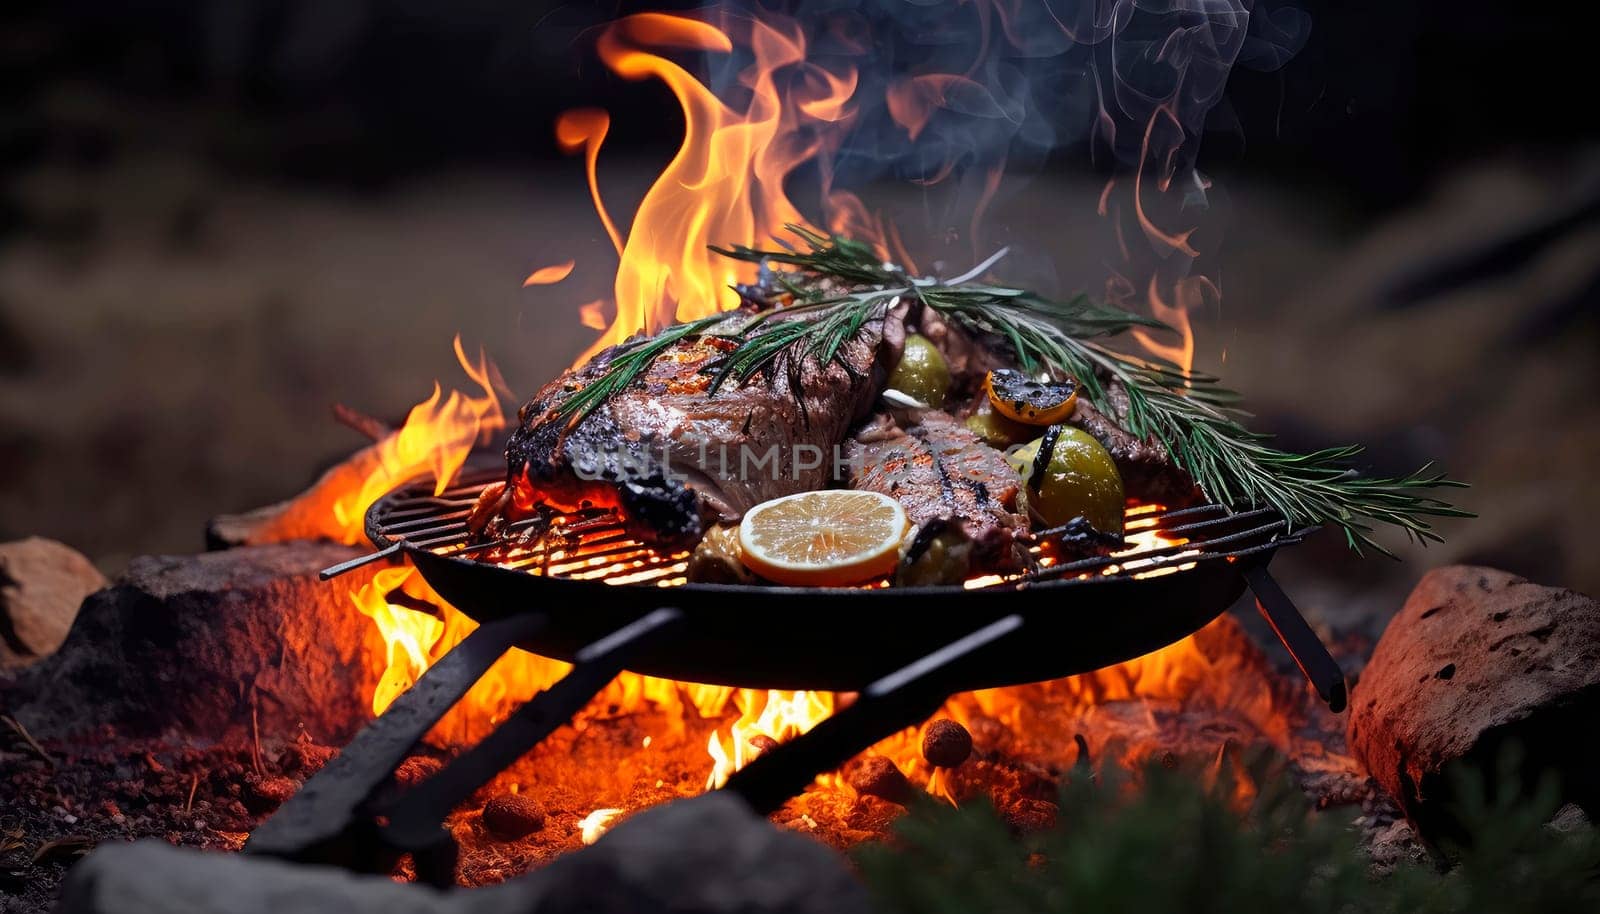 steak with vegetables is fried on coals on a black background. by yanadjana